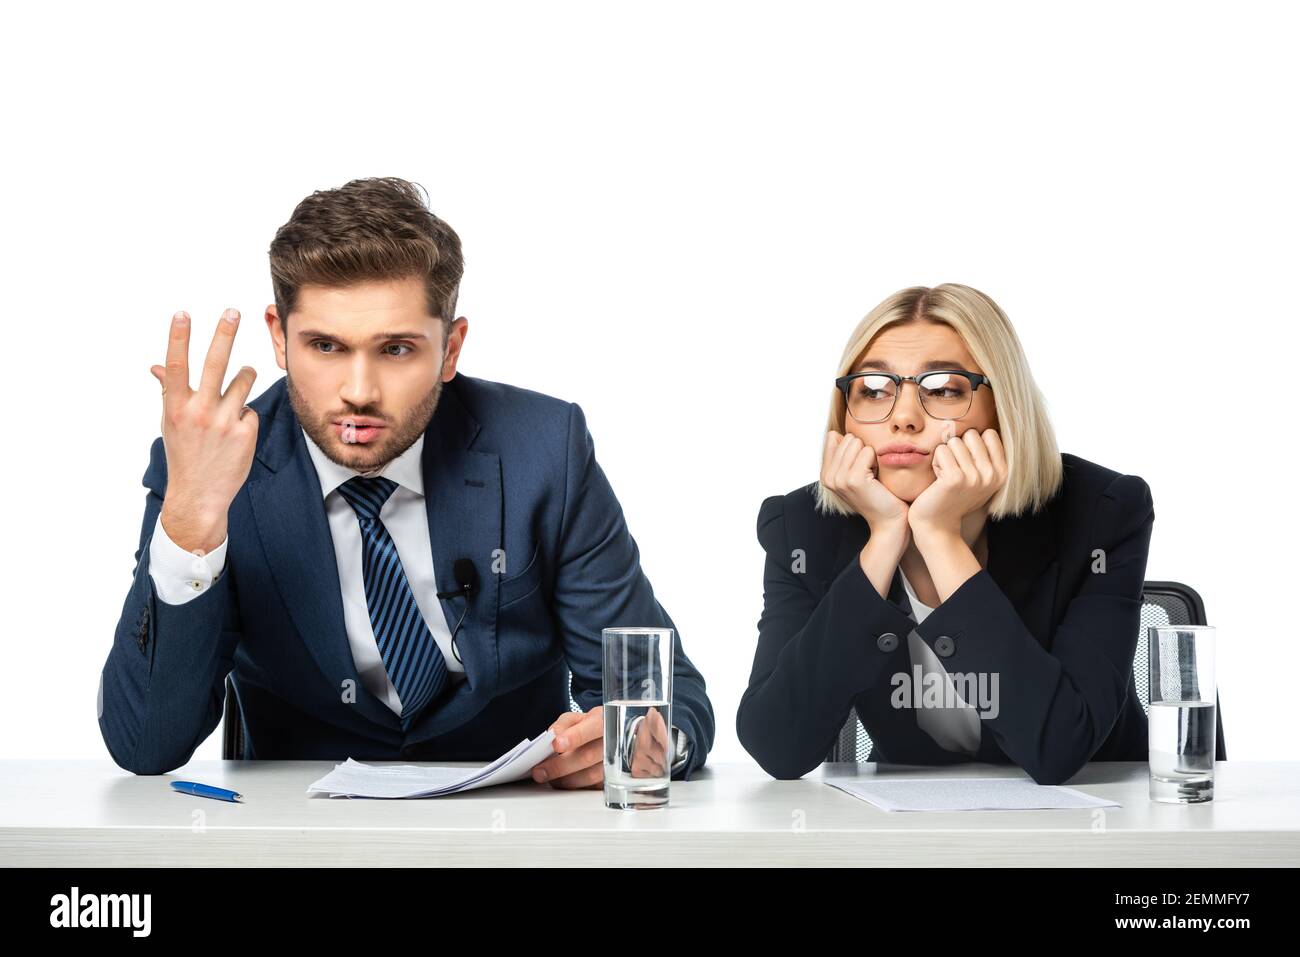 discouraged broadcaster gesturing near upset colleague at workplace isolated on white Stock Photo